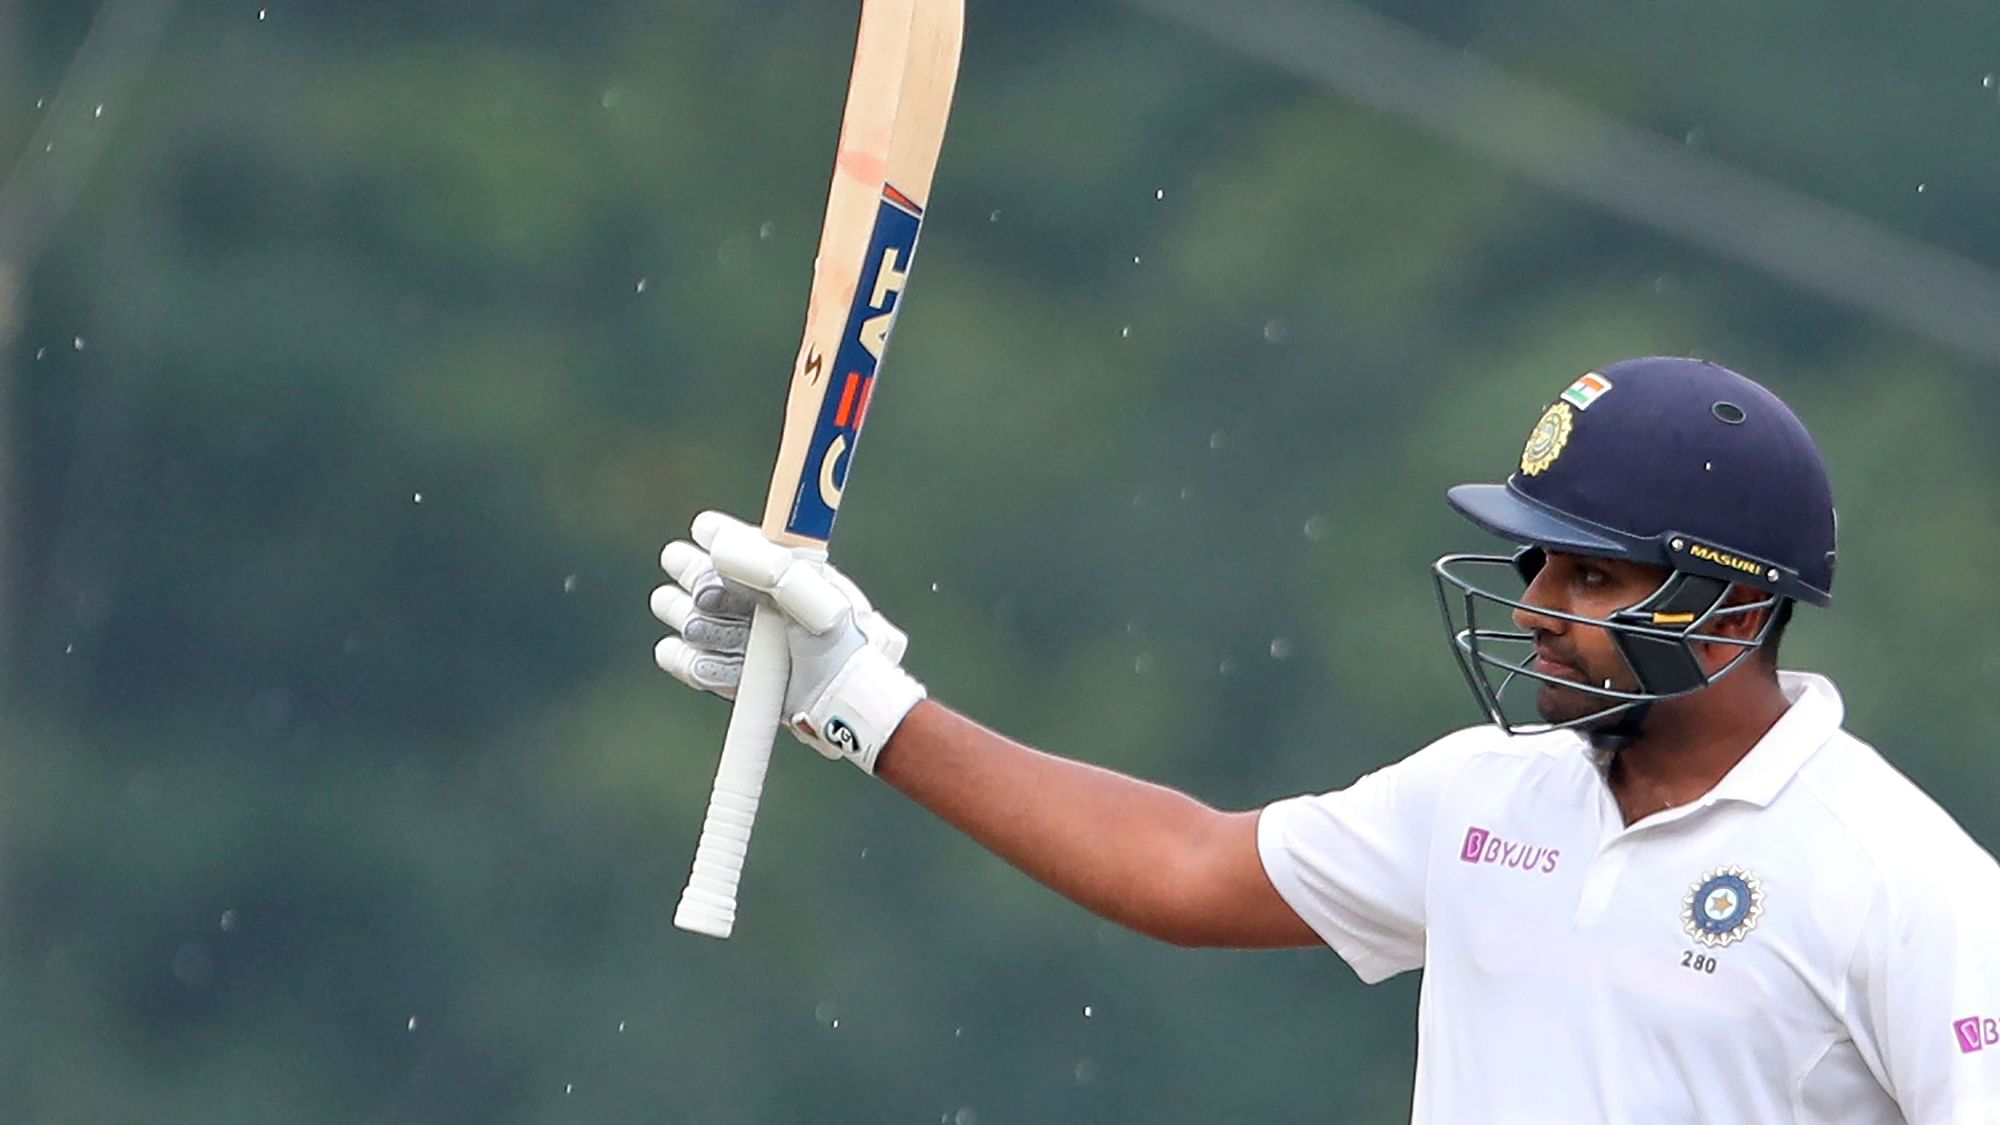 At the end of play on Day 1, Rohit Sharma was unbeaten on 117 off 164 balls